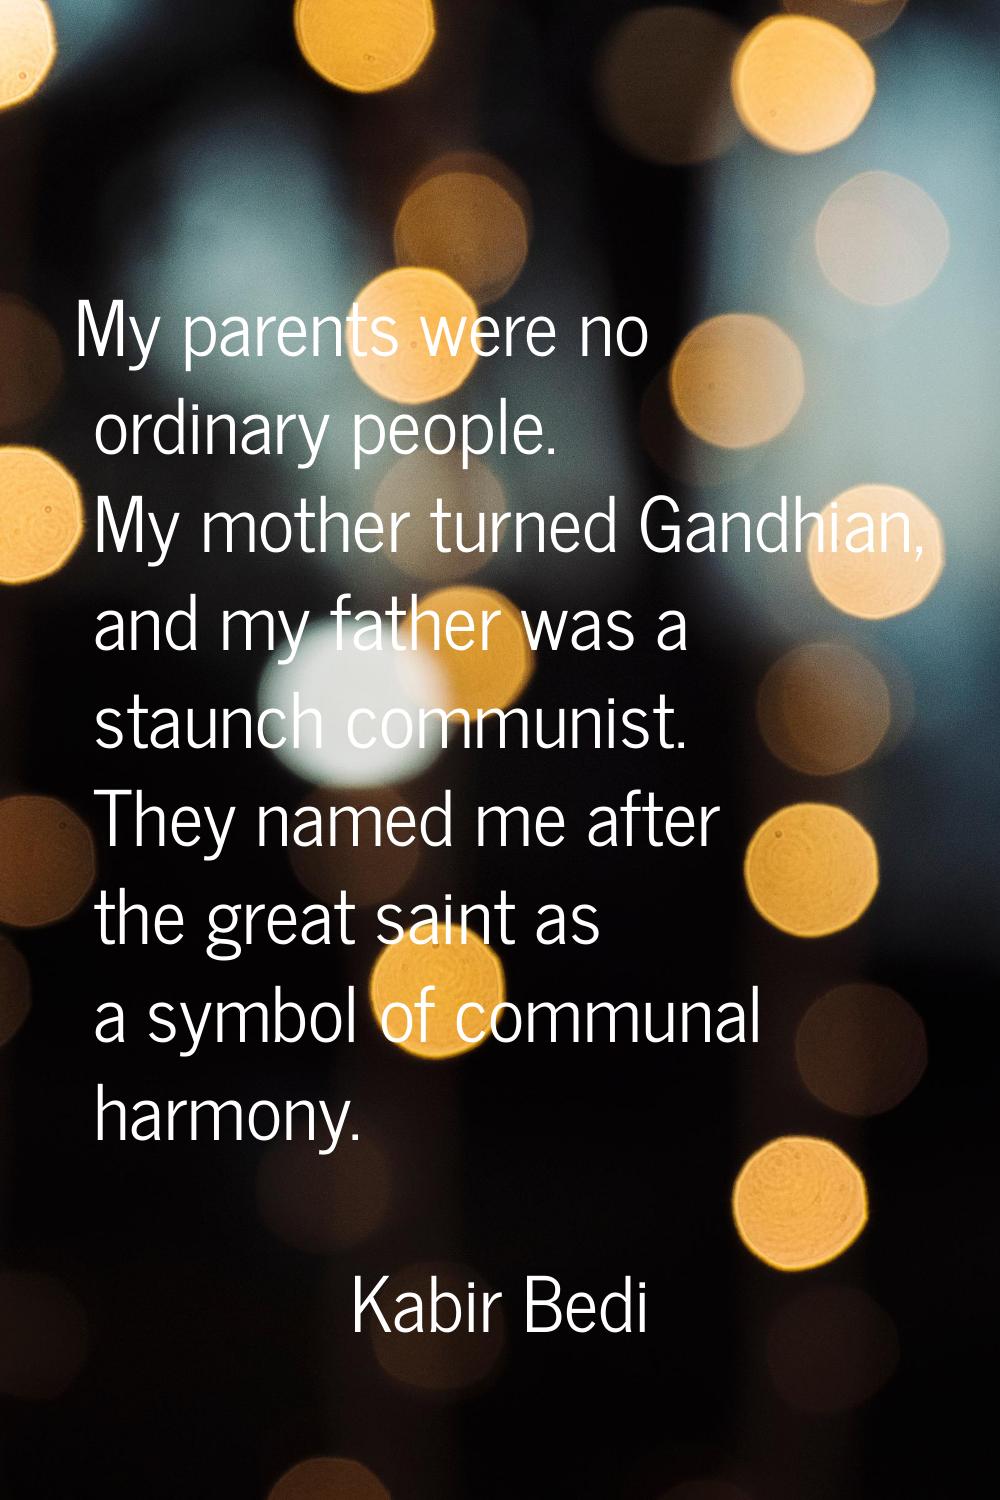 My parents were no ordinary people. My mother turned Gandhian, and my father was a staunch communis